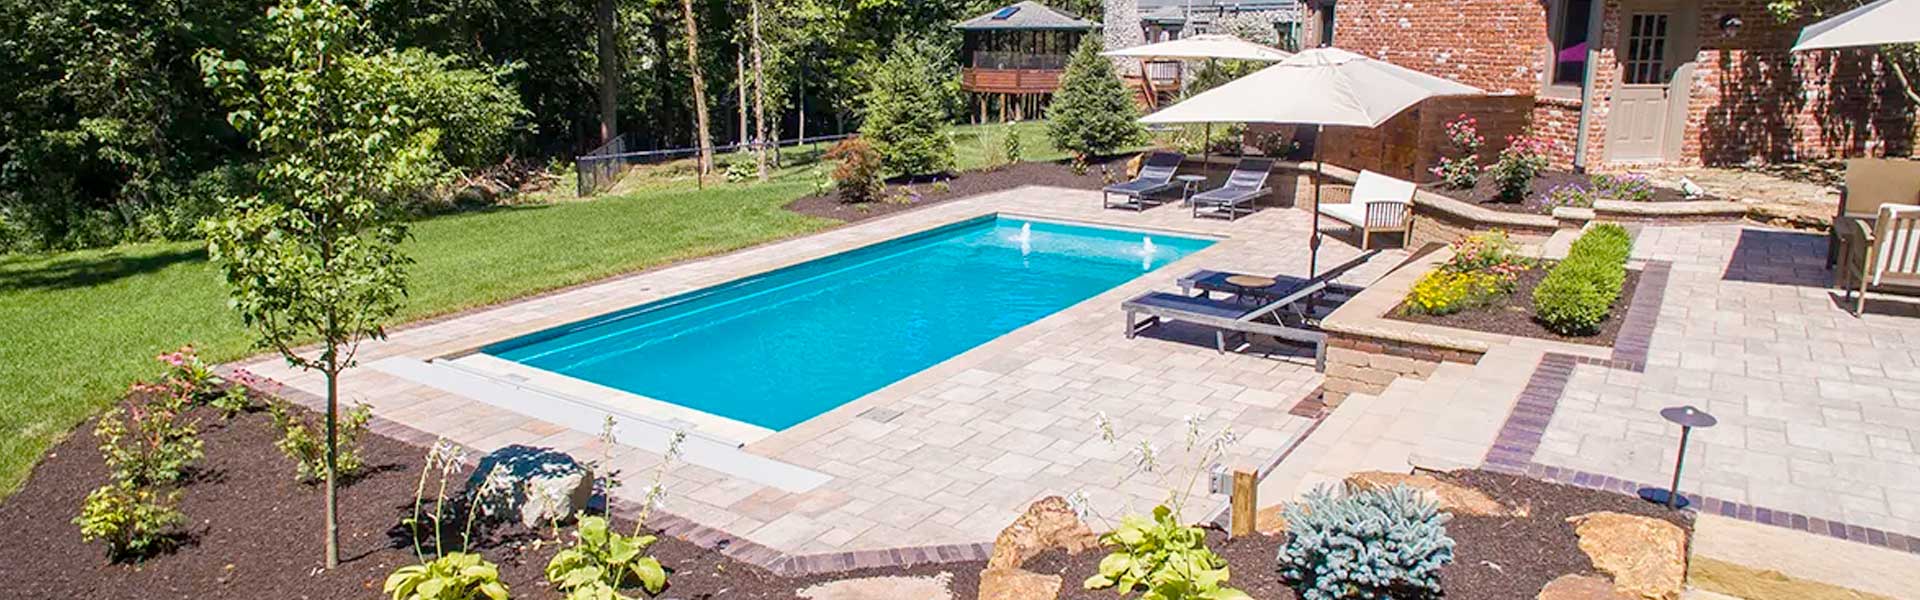 Landscaping Dos and Dont’s Around Your Backyard Fiberglass Pool